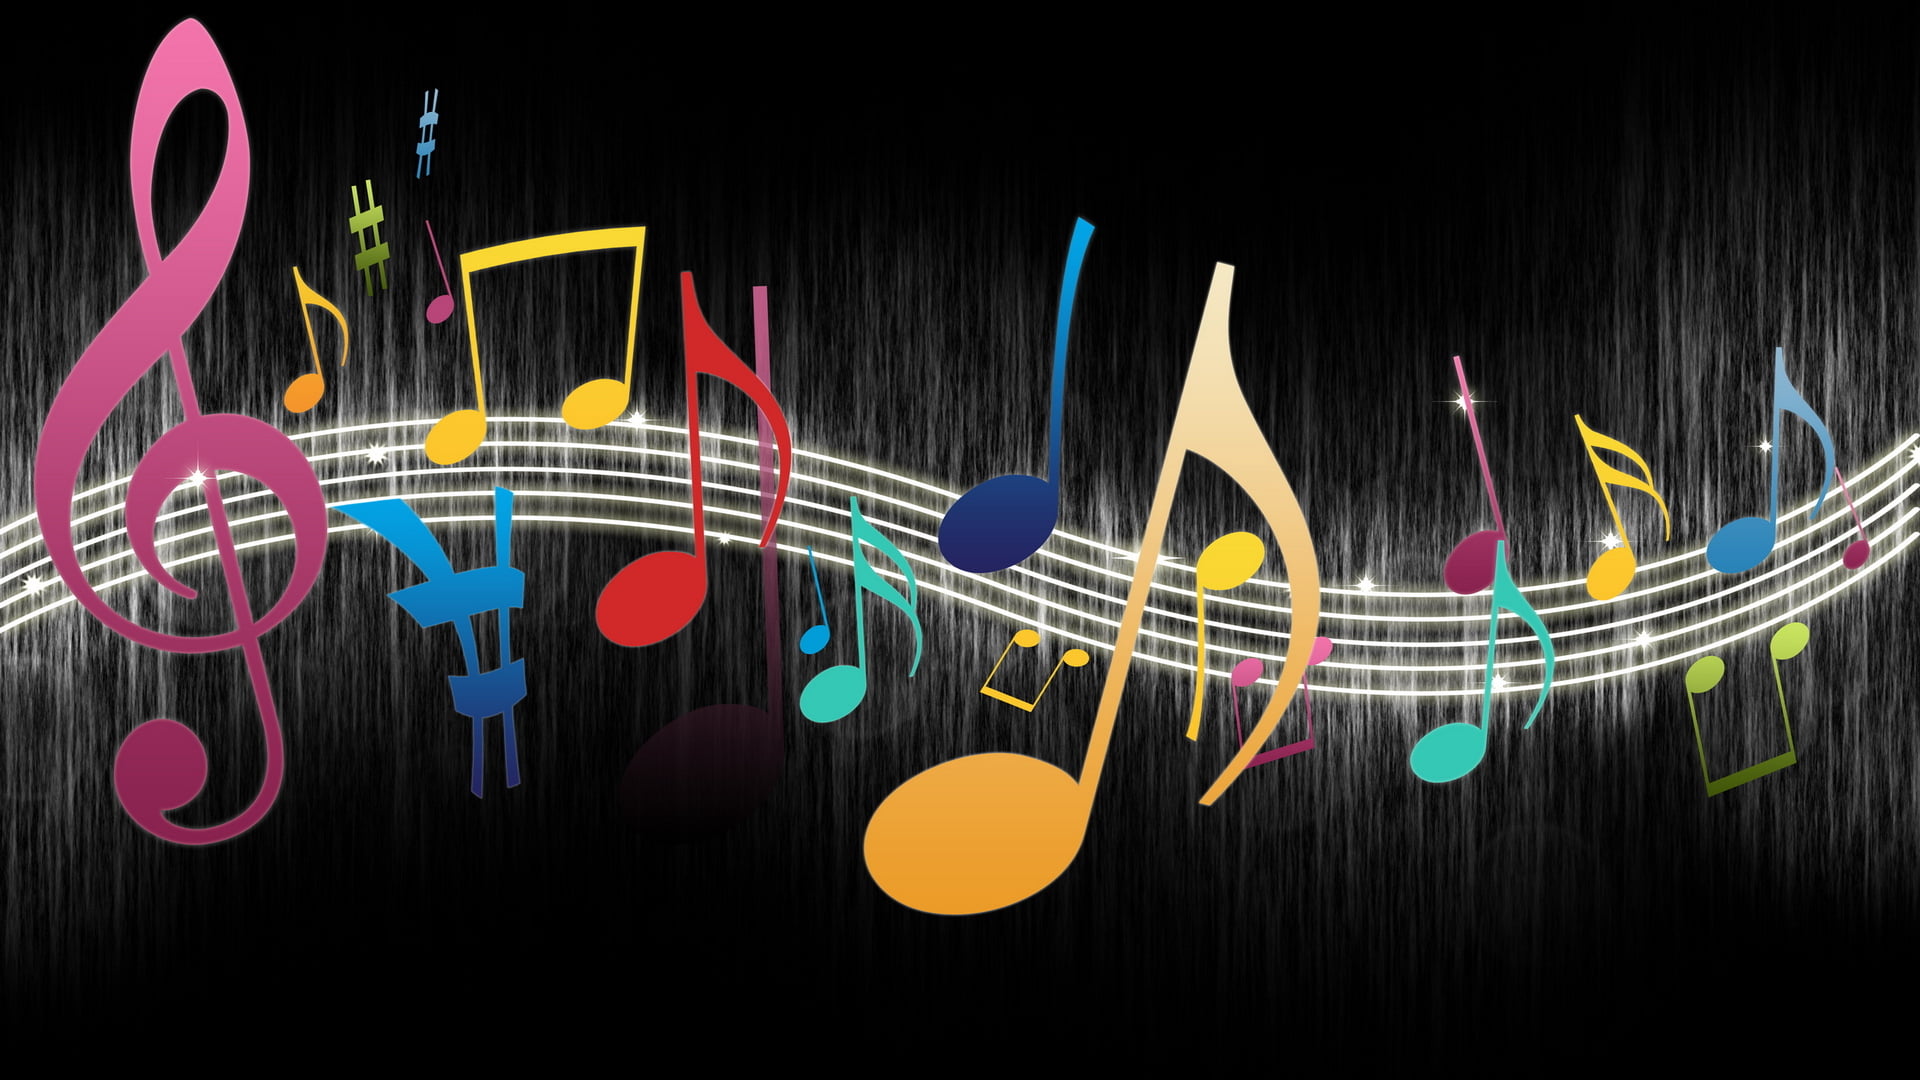 music notes illustration, muse, my, abstract, backgrounds, vector